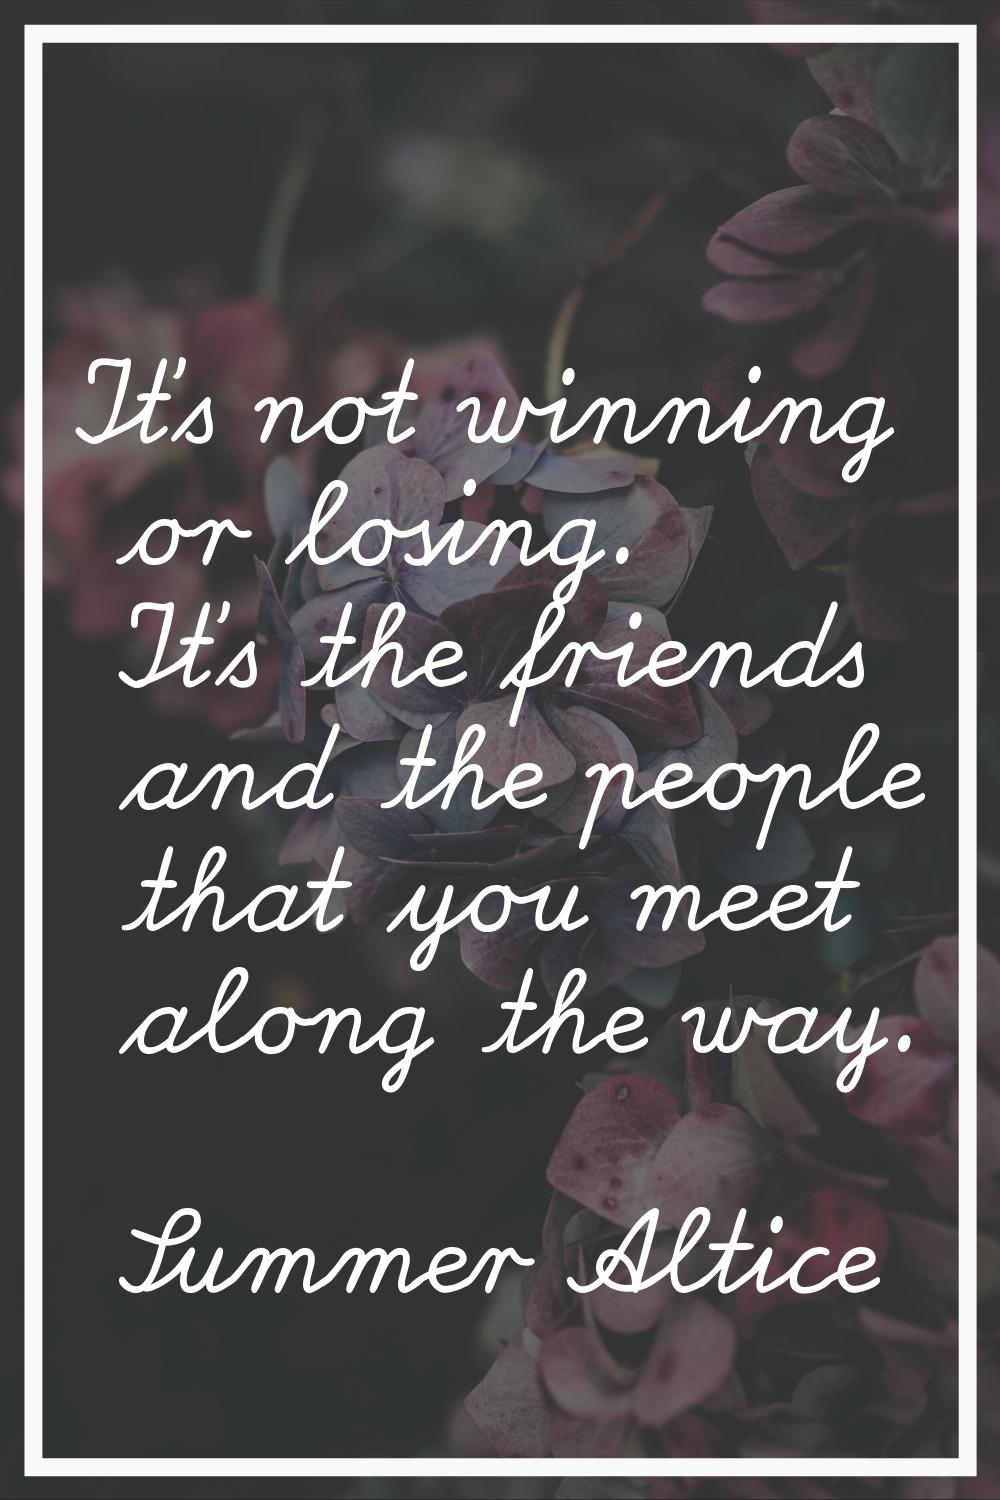 It's not winning or losing. It's the friends and the people that you meet along the way.